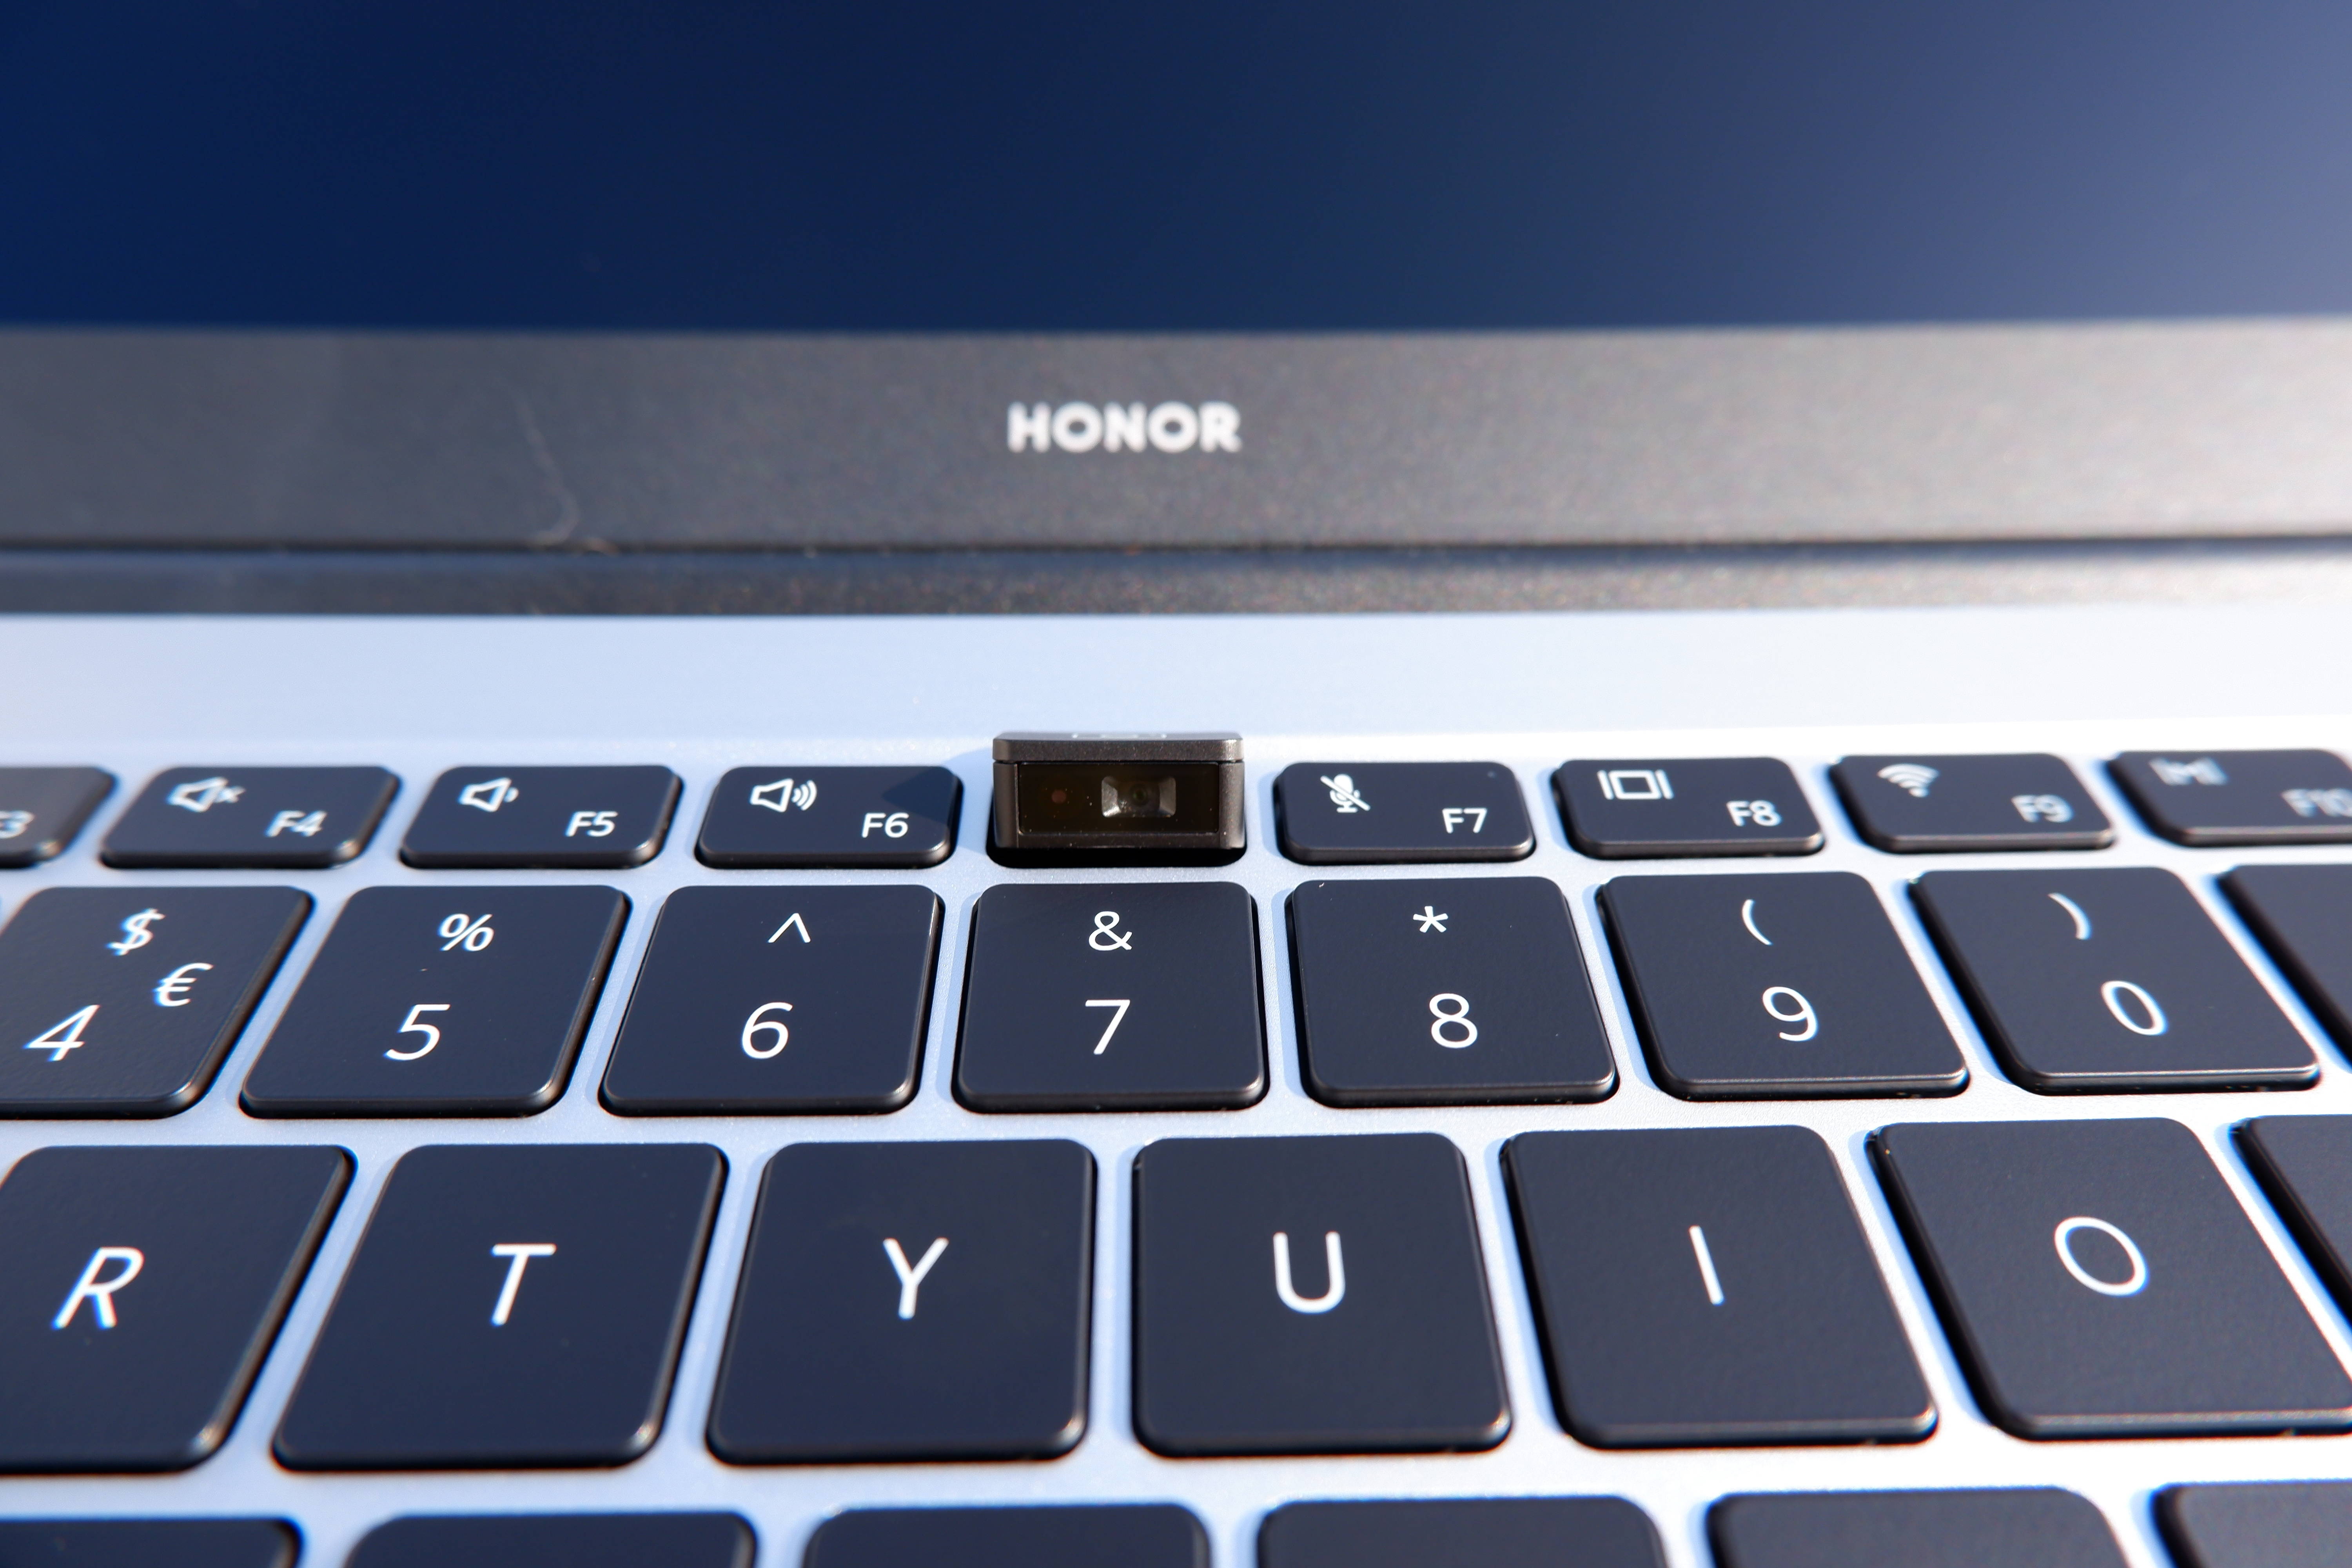 Honor Magicbook 14 Nice Keyboard And Ports Aplenty But With A